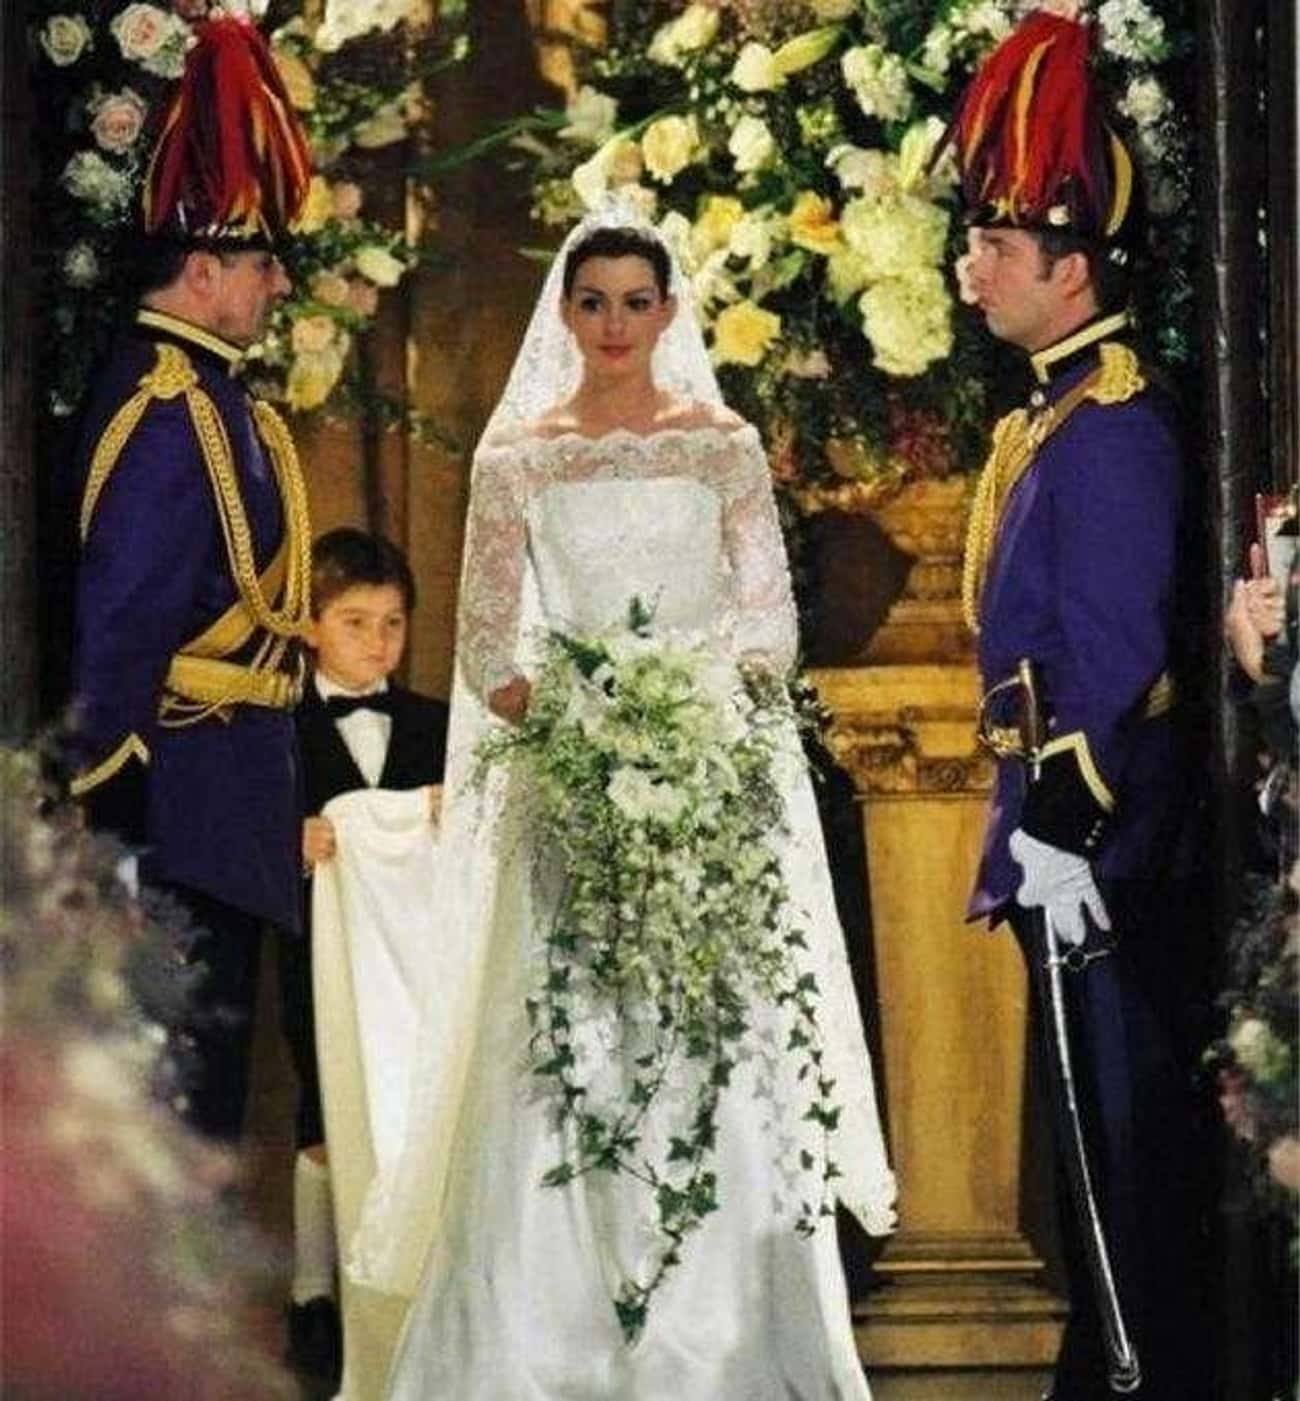 Mia's Dress In 'The Princess Diaries 2: Royal Engagement'